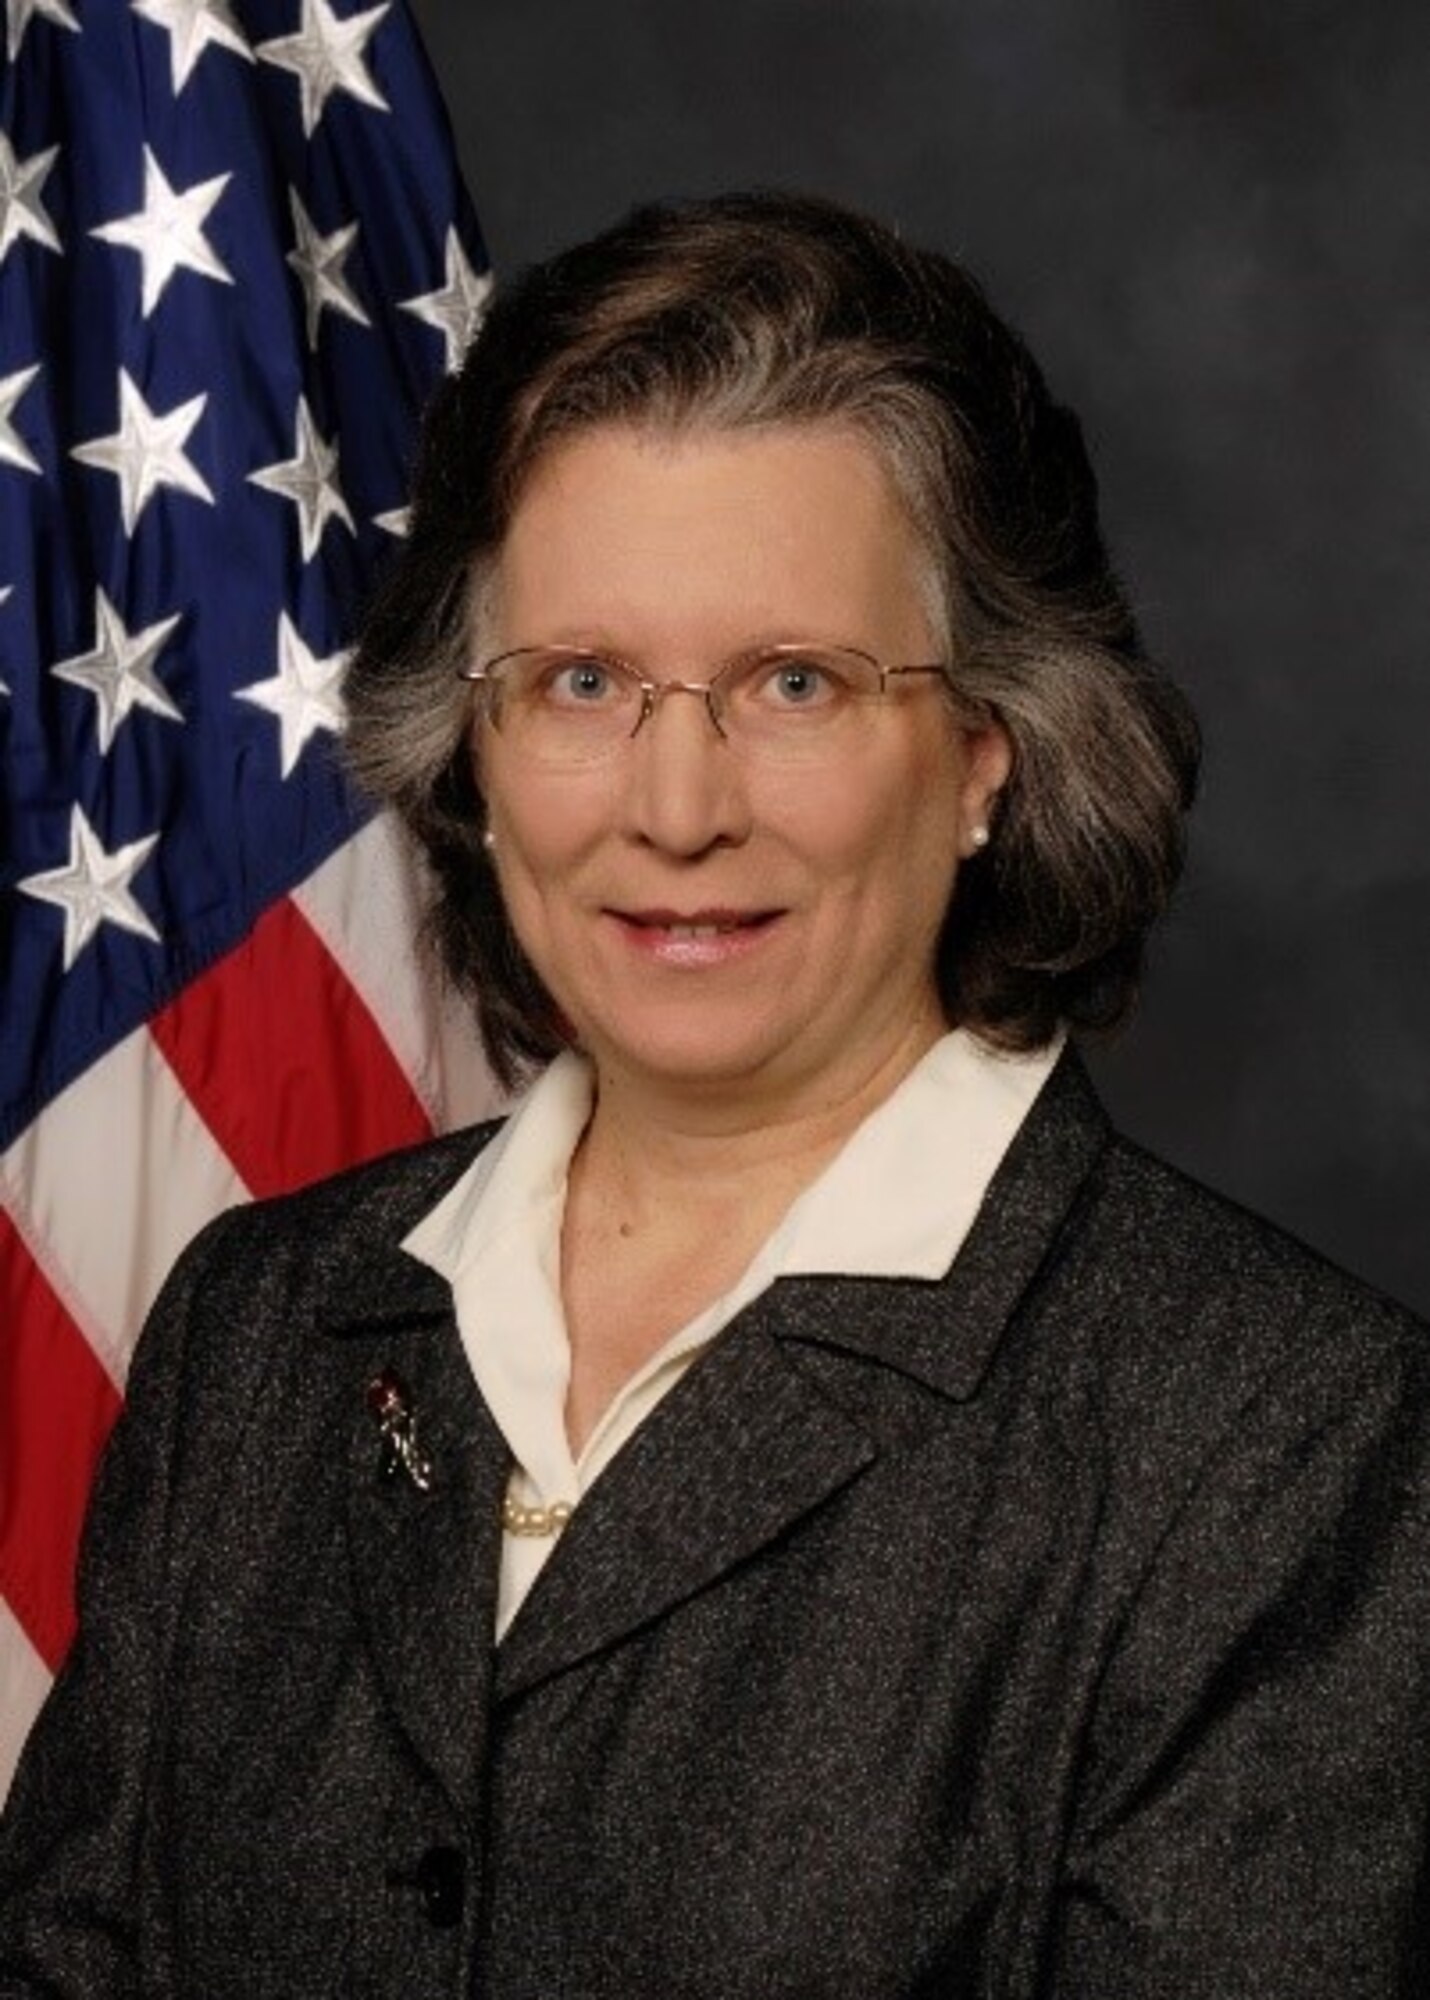 Dr. Heidi Ries has been selected as the Air Force Institute of Technology’s Chief Academic Officer charged with overseeing and ensuring the highest standards of academic quality in both graduate and professional continuing education instruction and research.  (U.S. Air Force photo)